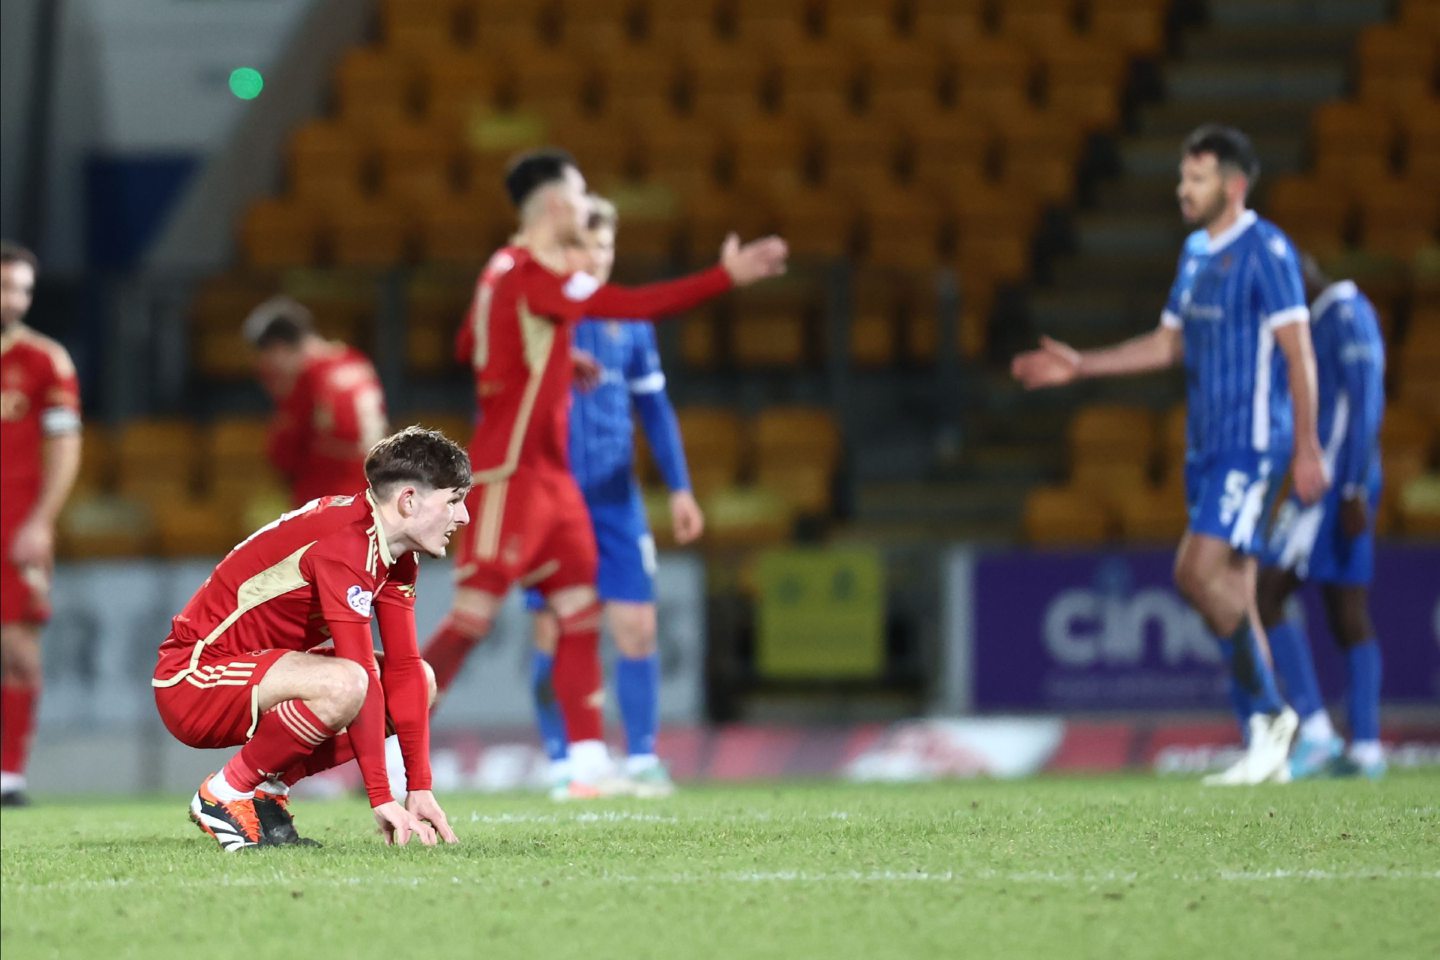 Leighton Clarkson (10) of Aberdeen looks dejected during the 1-1 draw at St Johnstone. Image: Shutterstock 